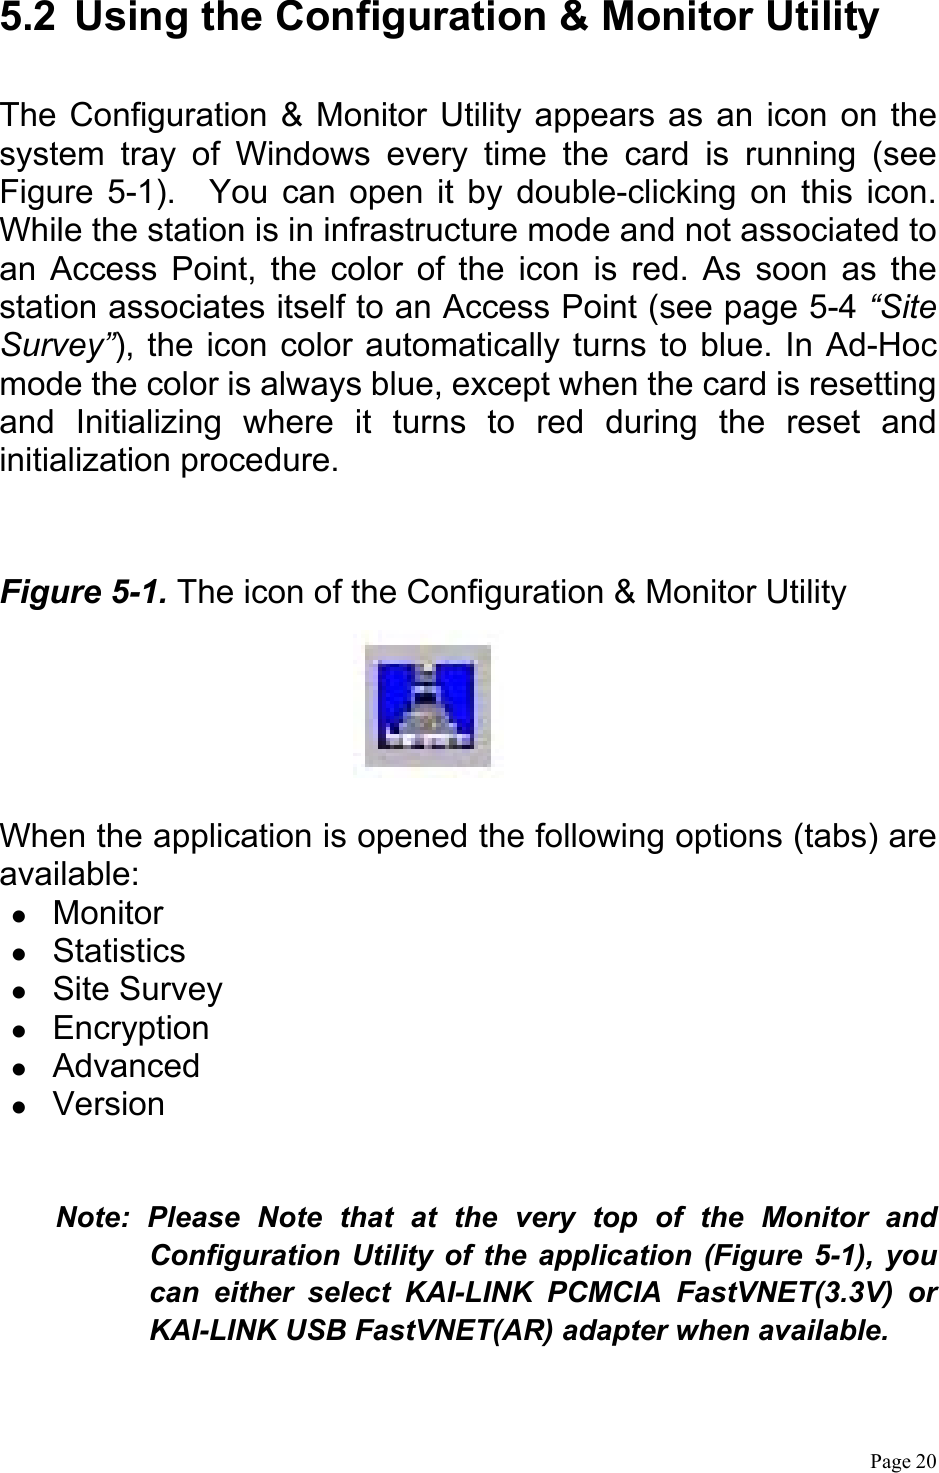  Page 20  5.2  Using the Configuration &amp; Monitor Utility  The Configuration &amp; Monitor Utility appears as an icon on the system tray of Windows every time the card is running (see Figure 5-1).  You can open it by double-clicking on this icon. While the station is in infrastructure mode and not associated to an Access Point, the color of the icon is red. As soon as the station associates itself to an Access Point (see page 5-4 “Site Survey”), the icon color automatically turns to blue. In Ad-Hoc mode the color is always blue, except when the card is resetting and Initializing where it turns to red during the reset and initialization procedure.  Figure 5-1. The icon of the Configuration &amp; Monitor Utility   When the application is opened the following options (tabs) are available:   Monitor   Statistics   Site Survey   Encryption   Advanced   Version  Note: Please Note that at the very top of the Monitor and Configuration Utility of the application (Figure 5-1), you can either select KAI-LINK PCMCIA FastVNET(3.3V) or KAI-LINK USB FastVNET(AR) adapter when available. 